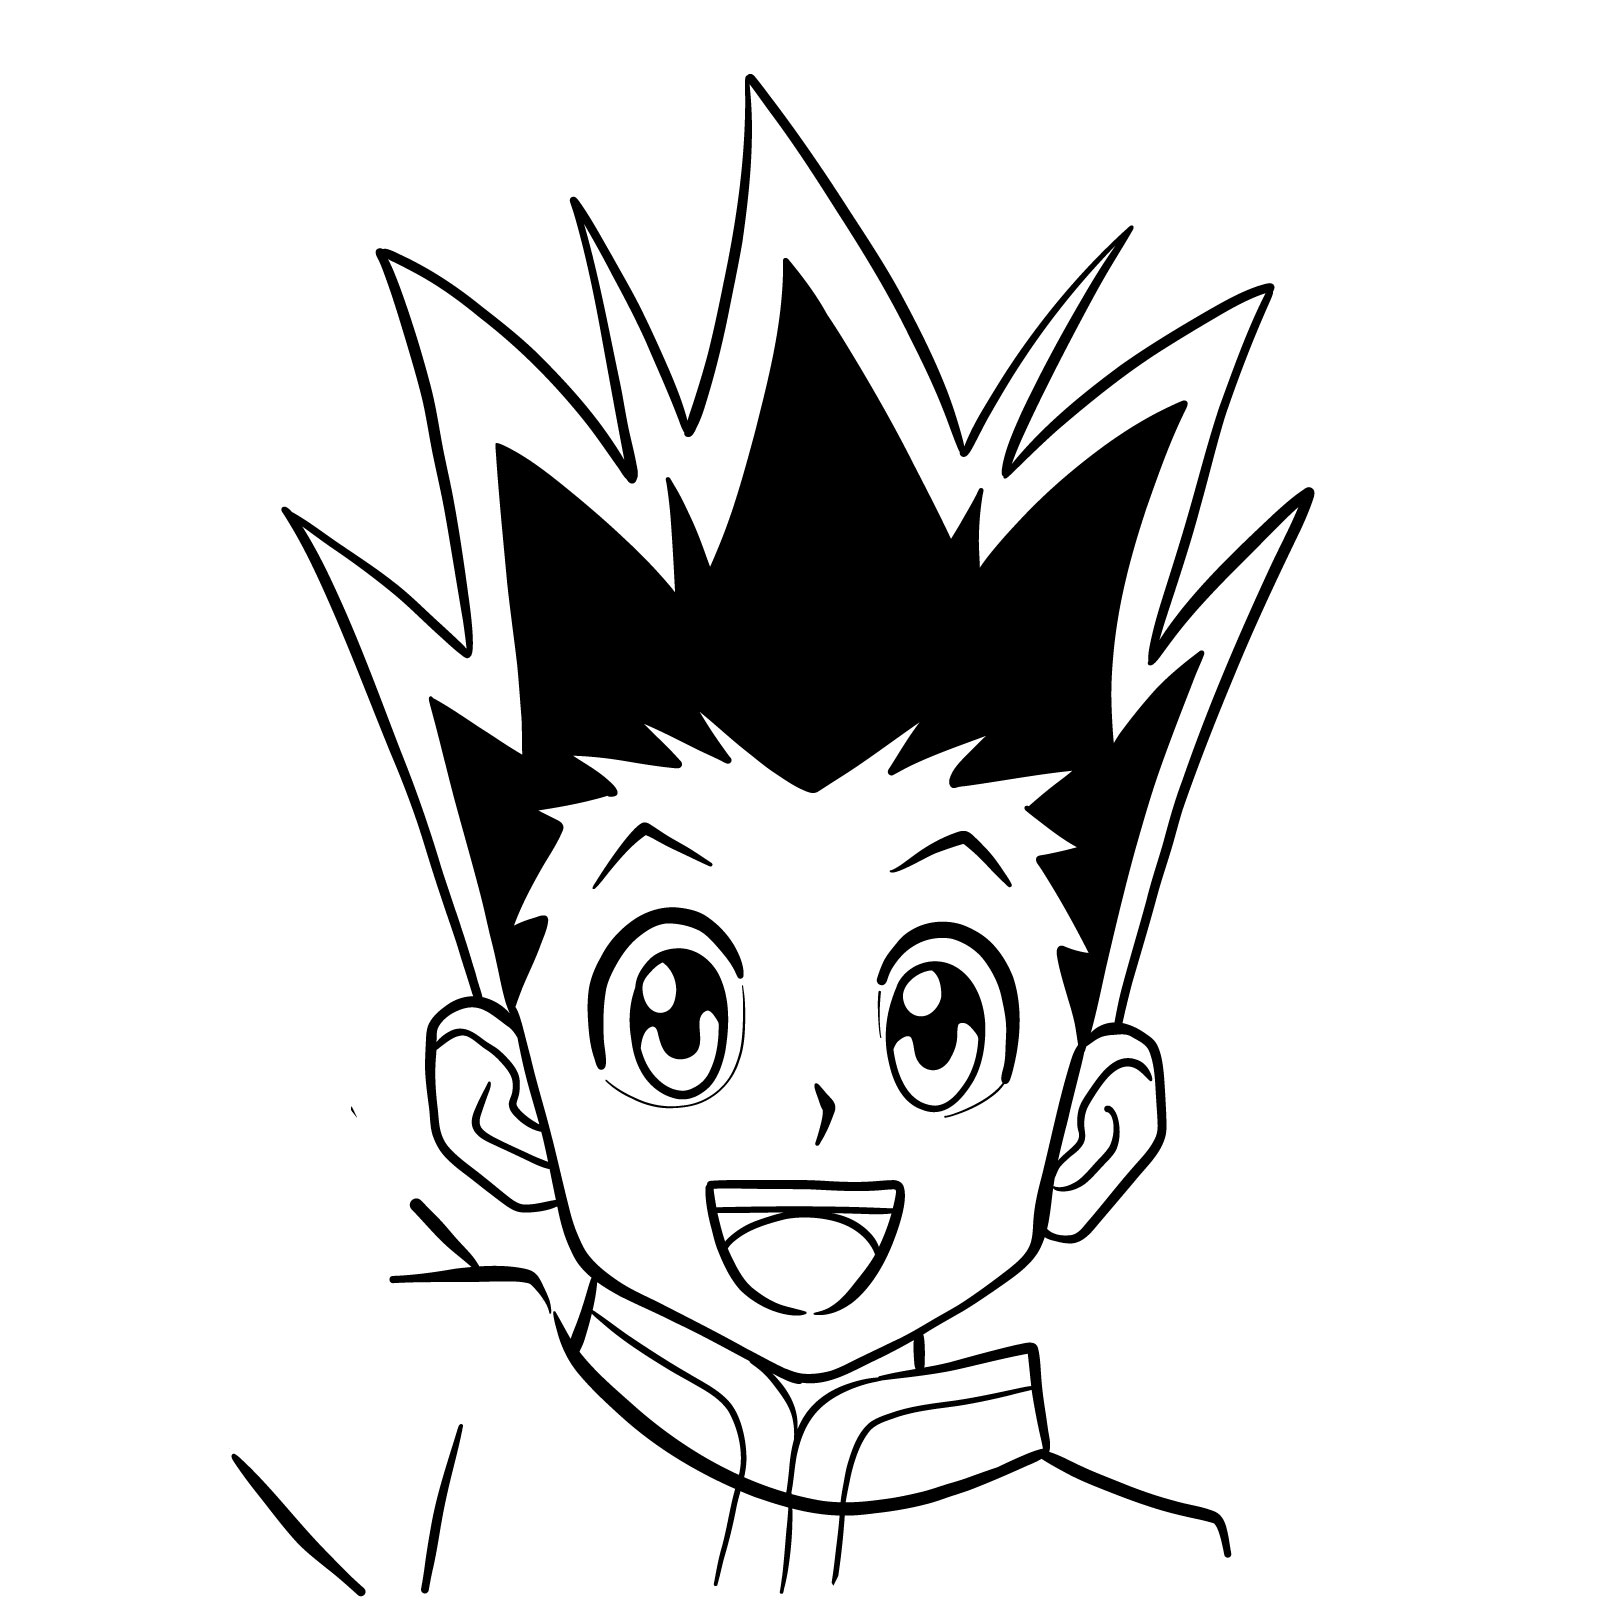 How to draw the face of Gon Freecss - final step